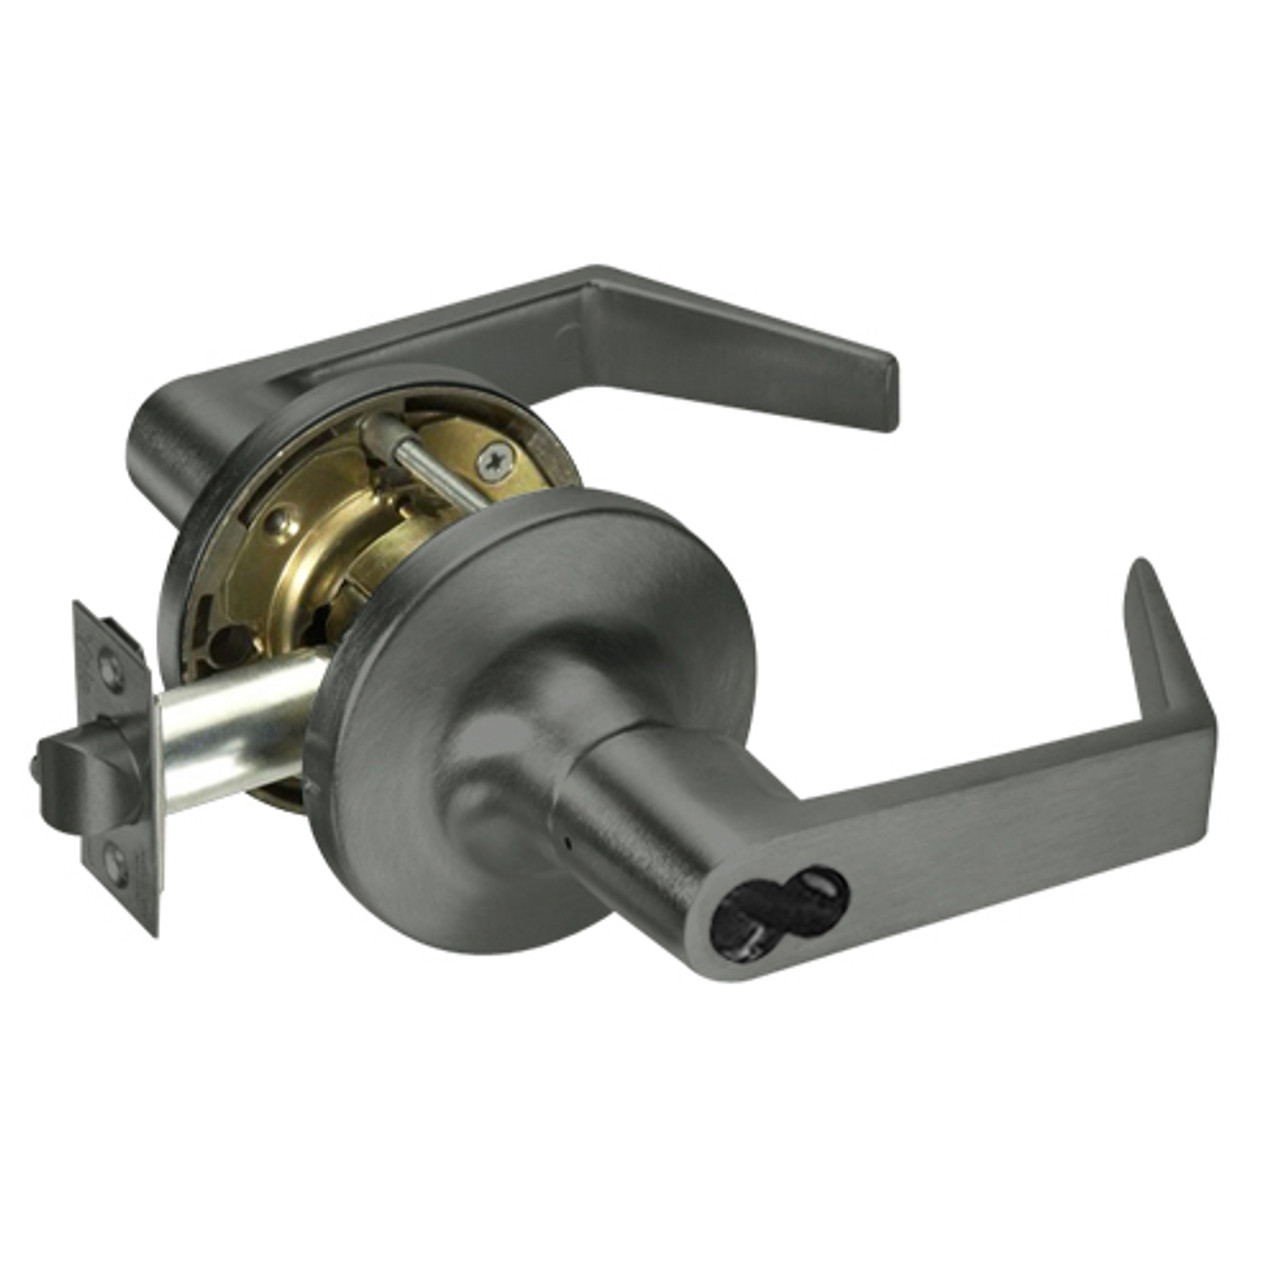 M-AU5417LN-620 Yale 5400LN Series Double Cylinder Apartment or Exit Cylindrical Locks with Augusta Lever Prepped for Medeco-ASSA IC Core in Antique Nickel